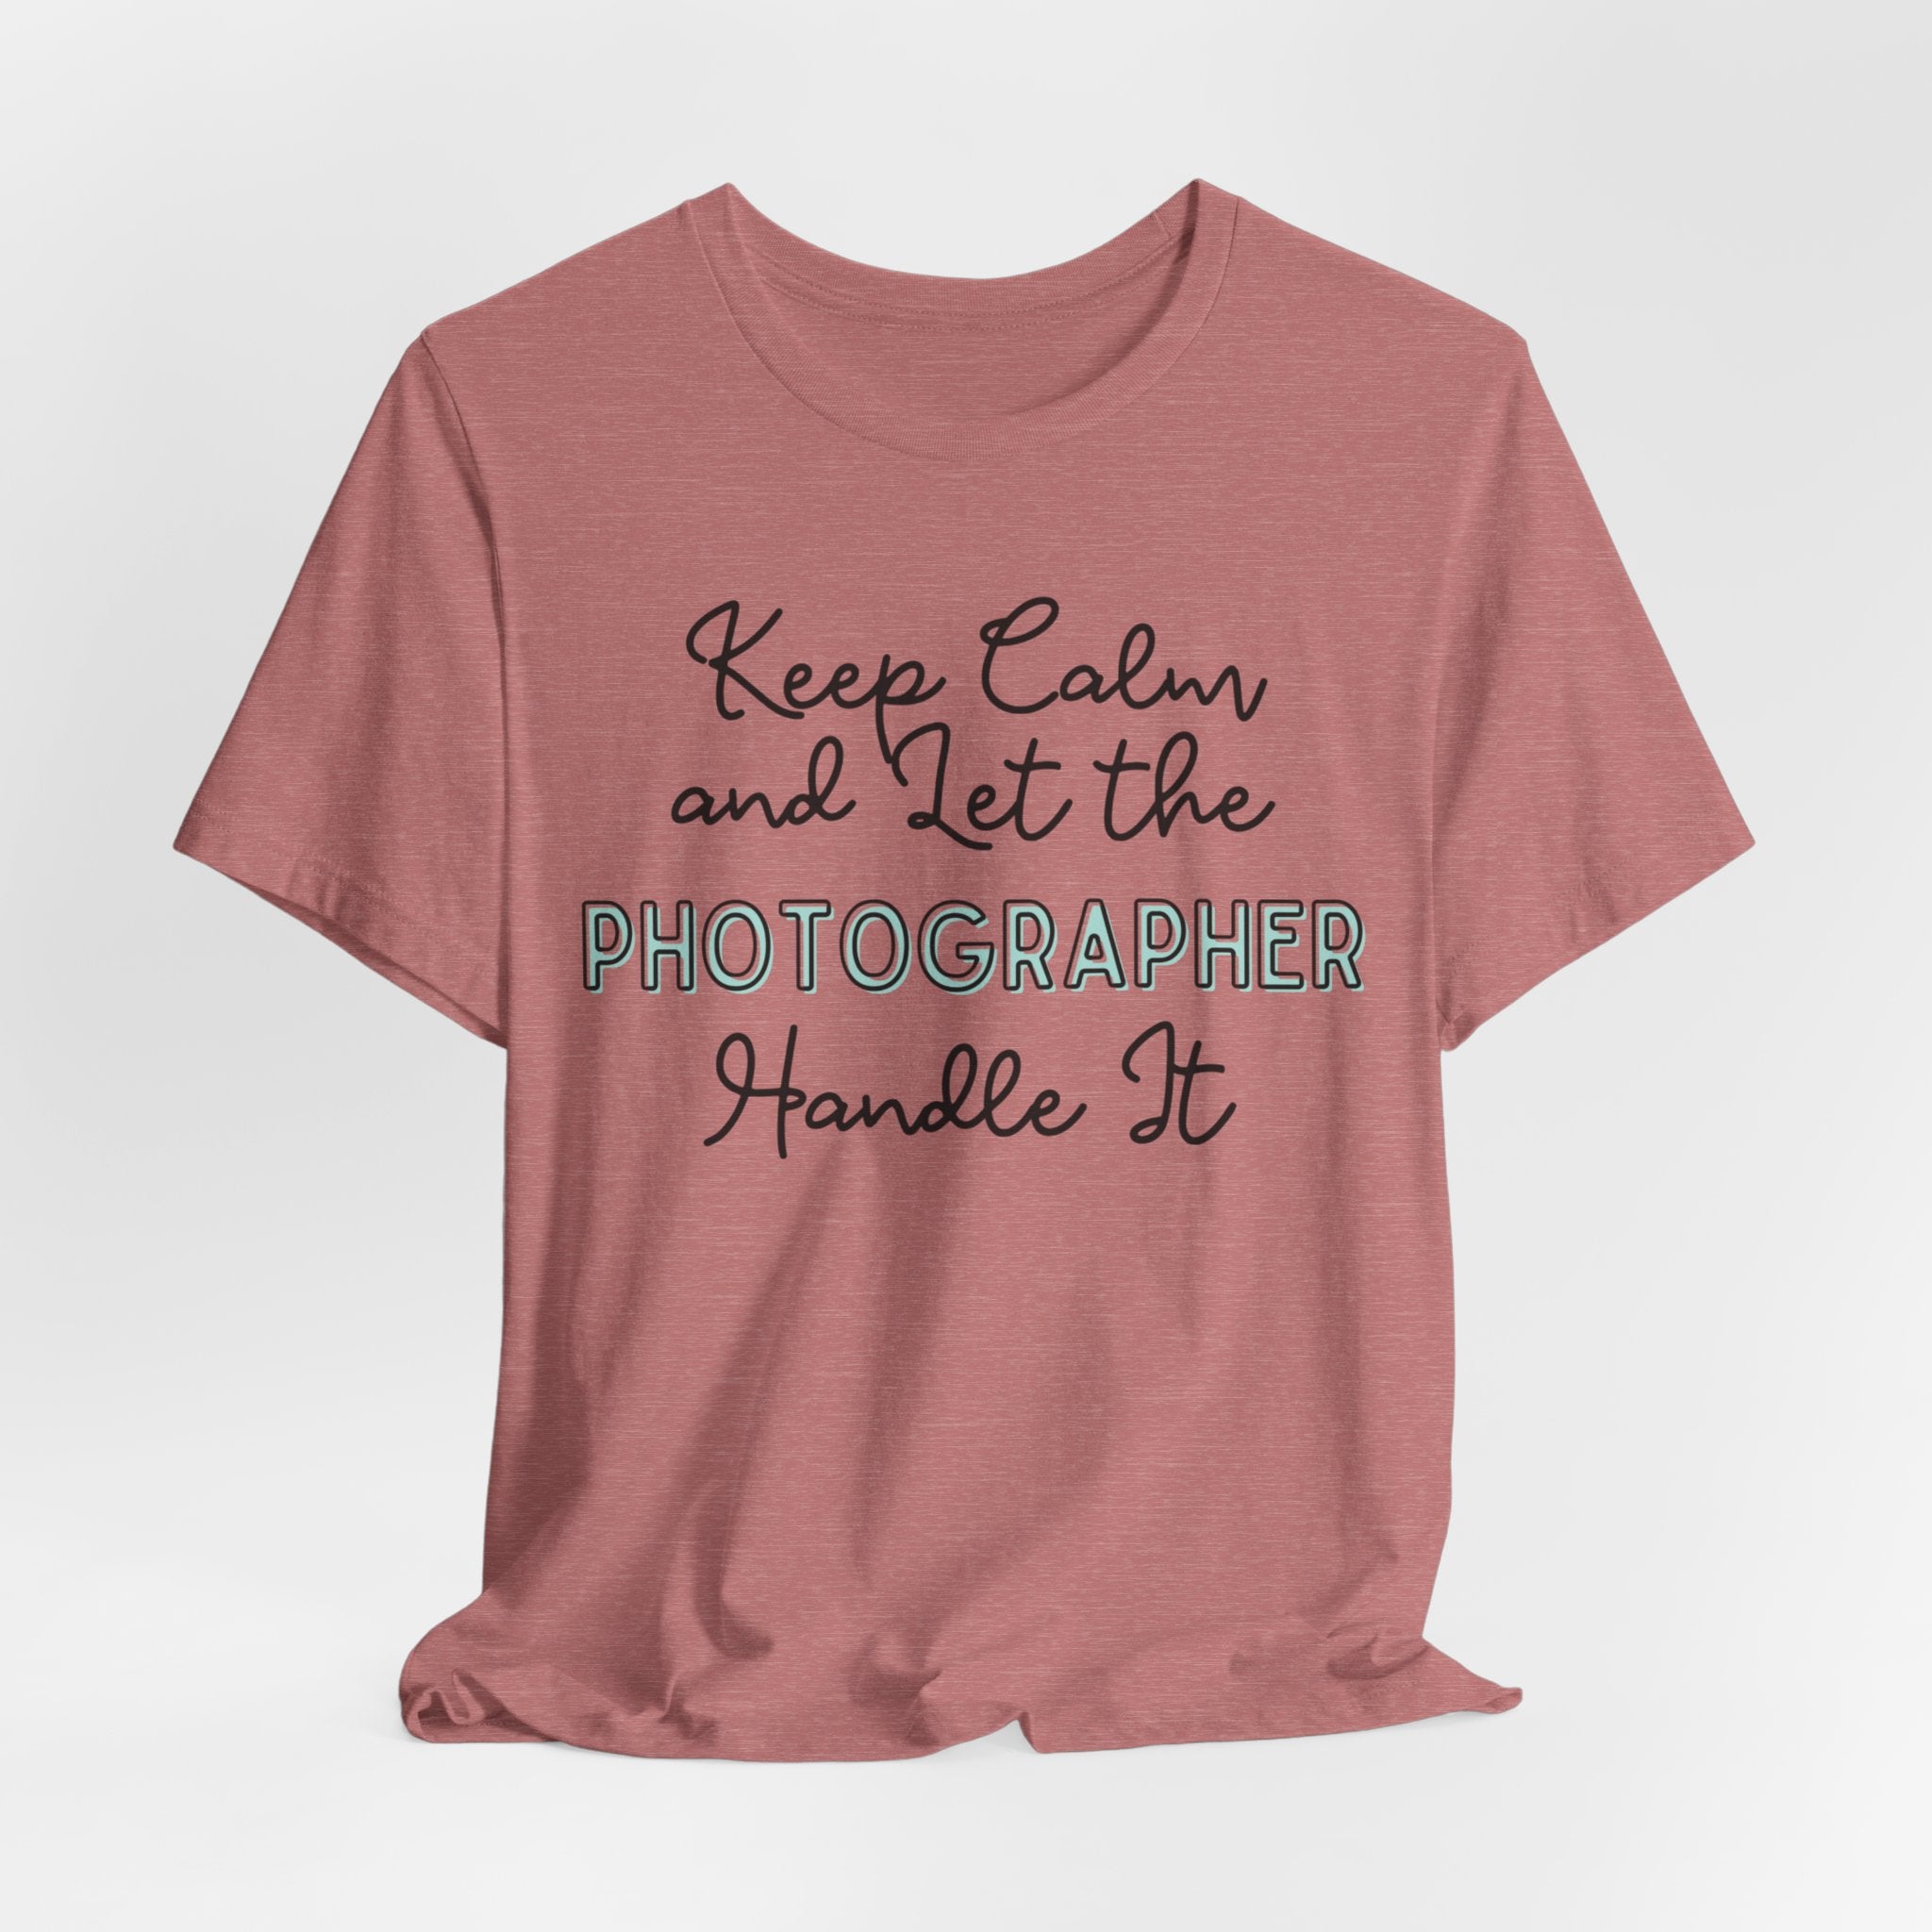 Keep Calm and let the Photographer handle It - Jersey Short Sleeve Tee